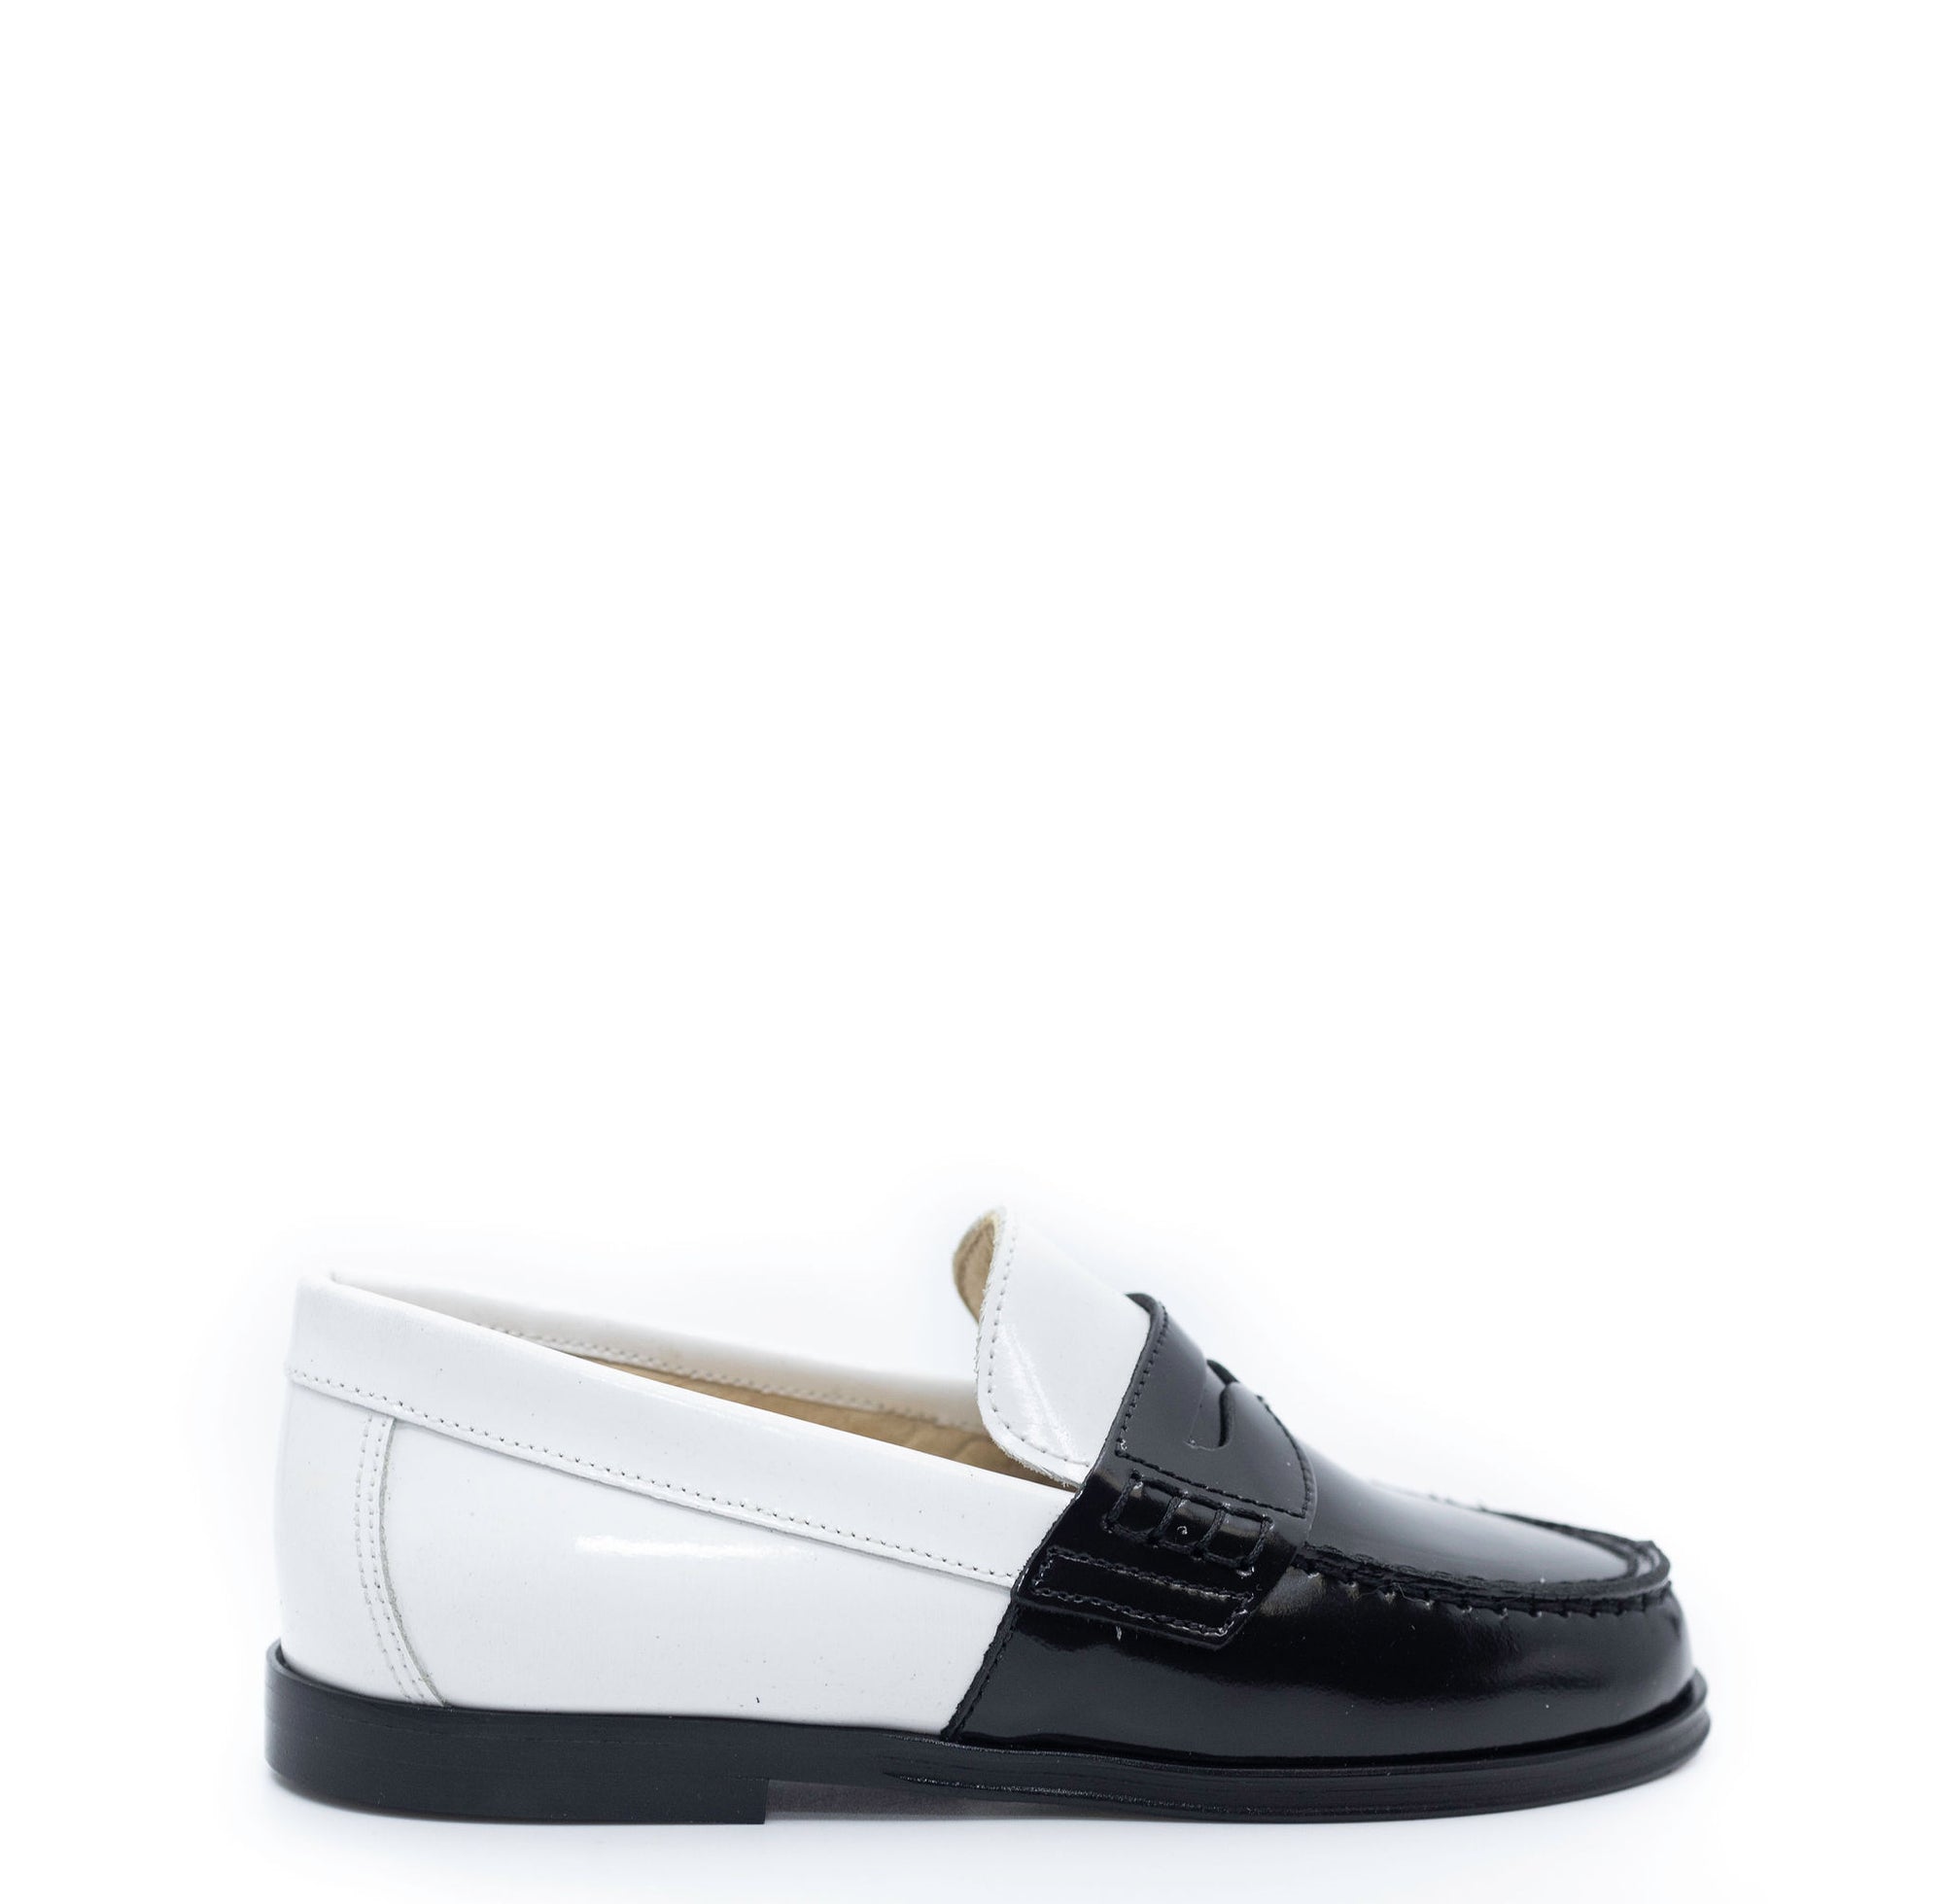 Blublonc Black and White Colorblock Penny Loafer-Tassel Children Shoes